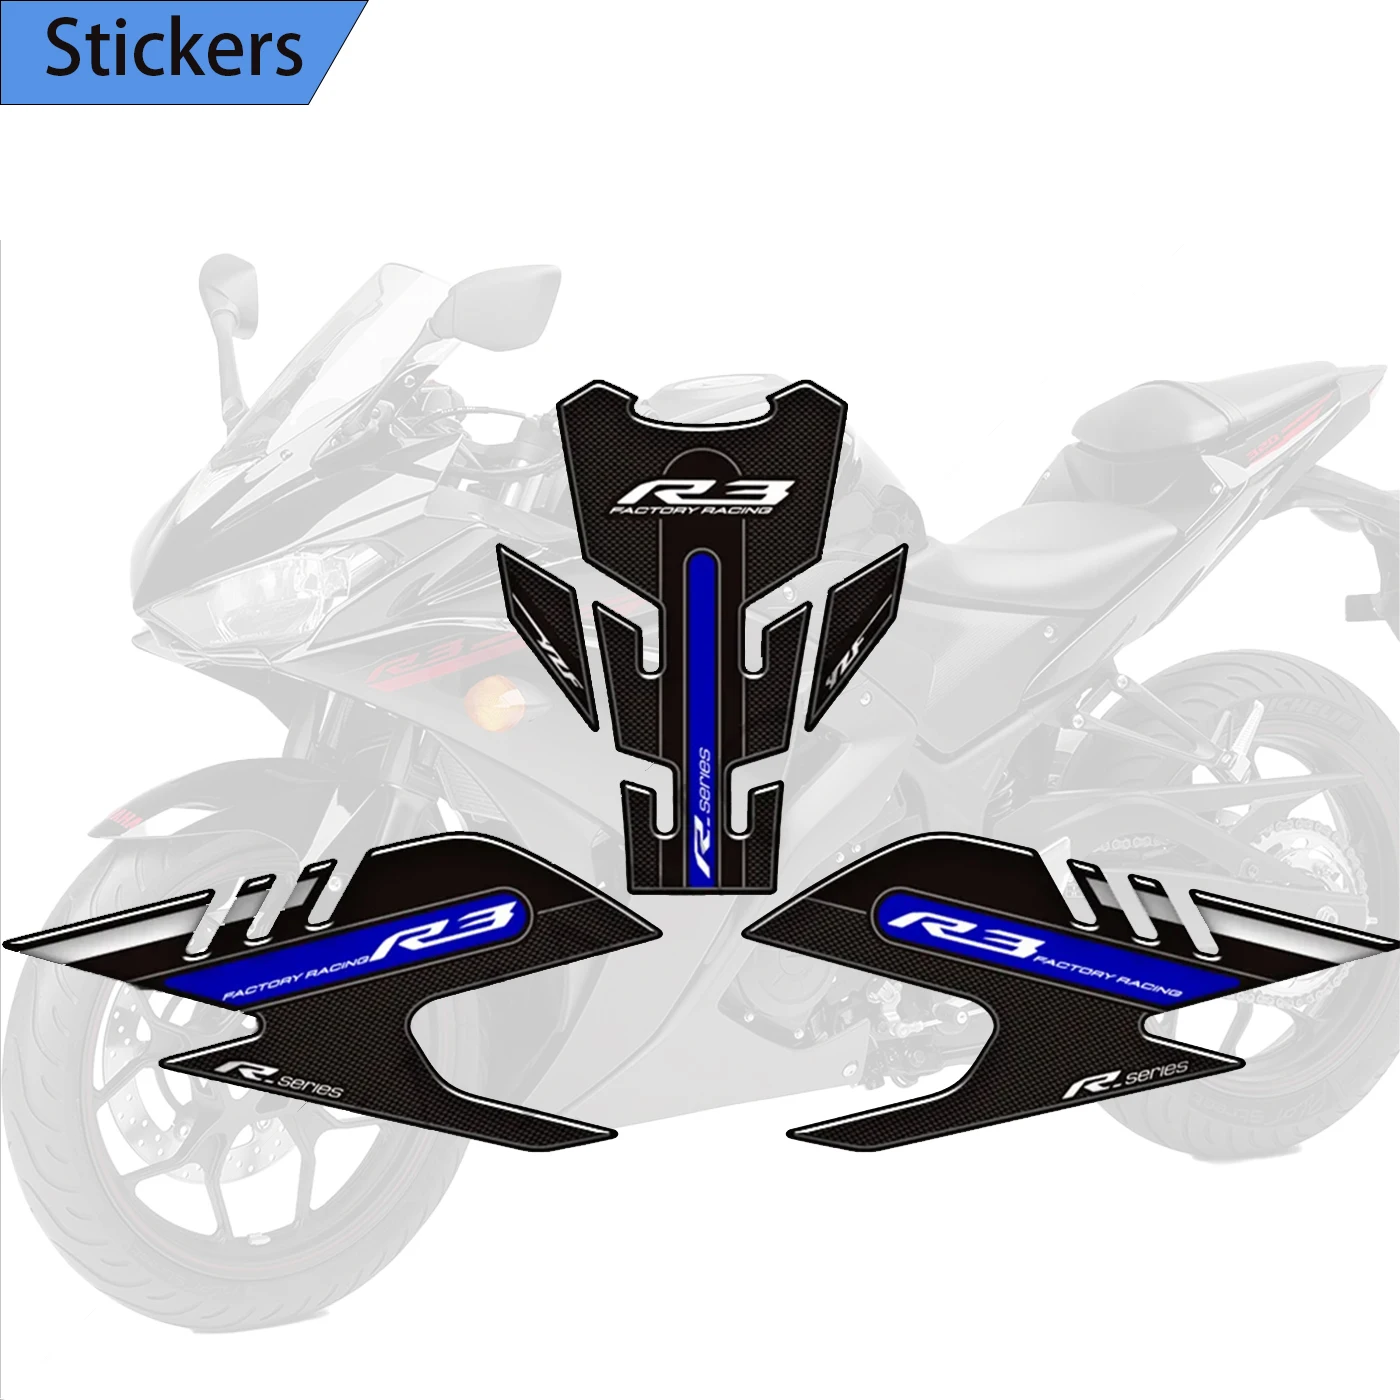 2019-2022 Tank Pad Side Grips Gas Fuel Oil Kit Knee Decals Protector For YAMAHA YZF R3 YZF-R3 YZFR3